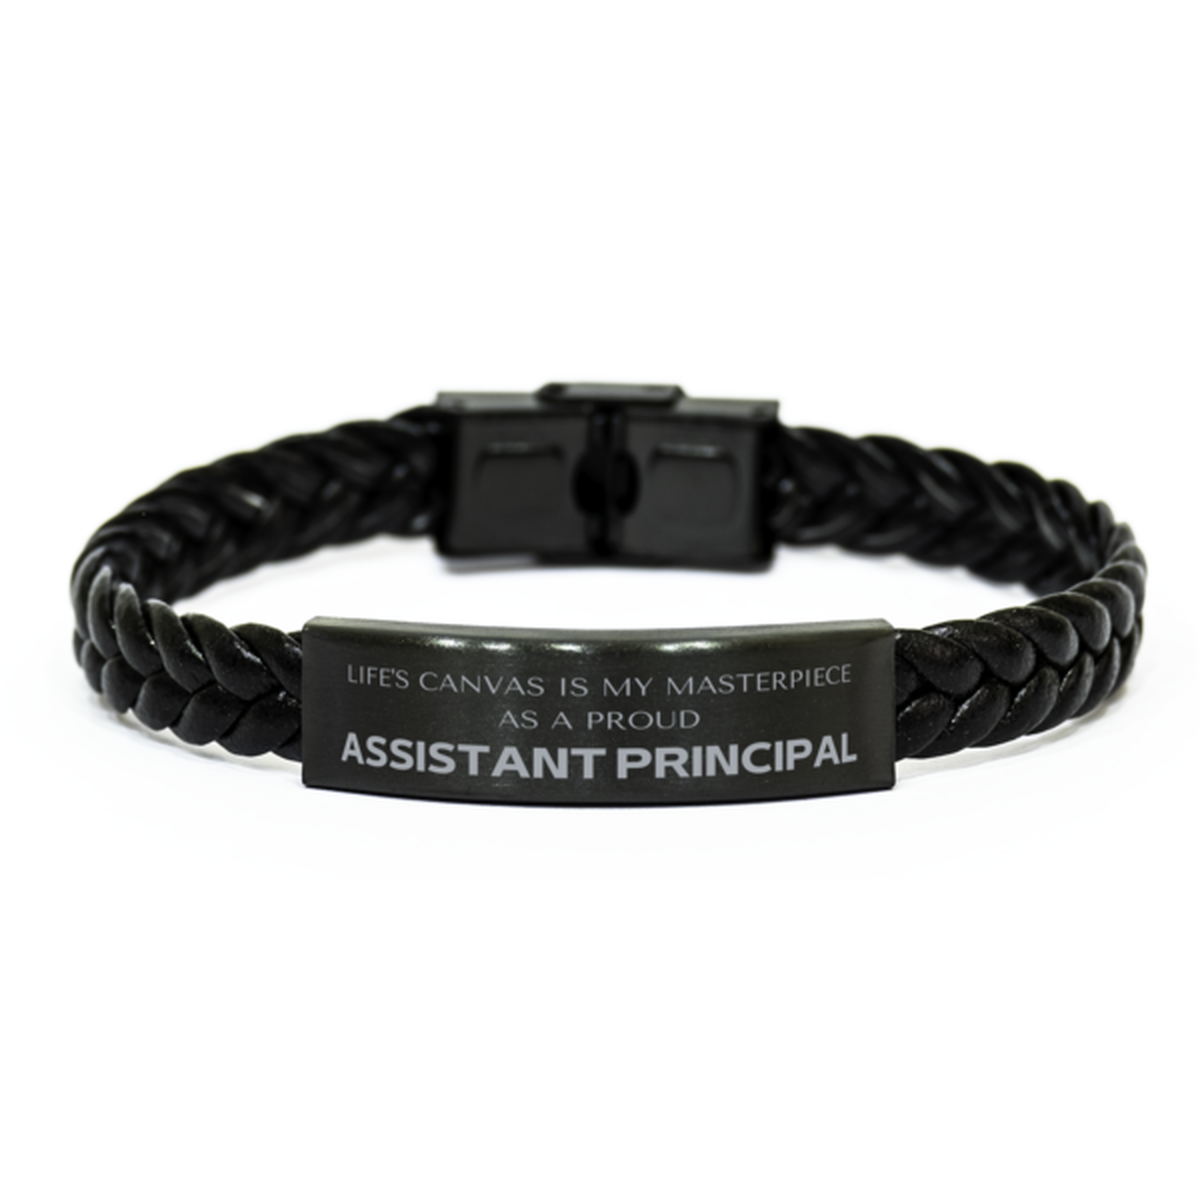 Proud Assistant Principal Gifts, Life's canvas is my masterpiece, Epic Birthday Christmas Unique Braided Leather Bracelet For Assistant Principal, Coworkers, Men, Women, Friends